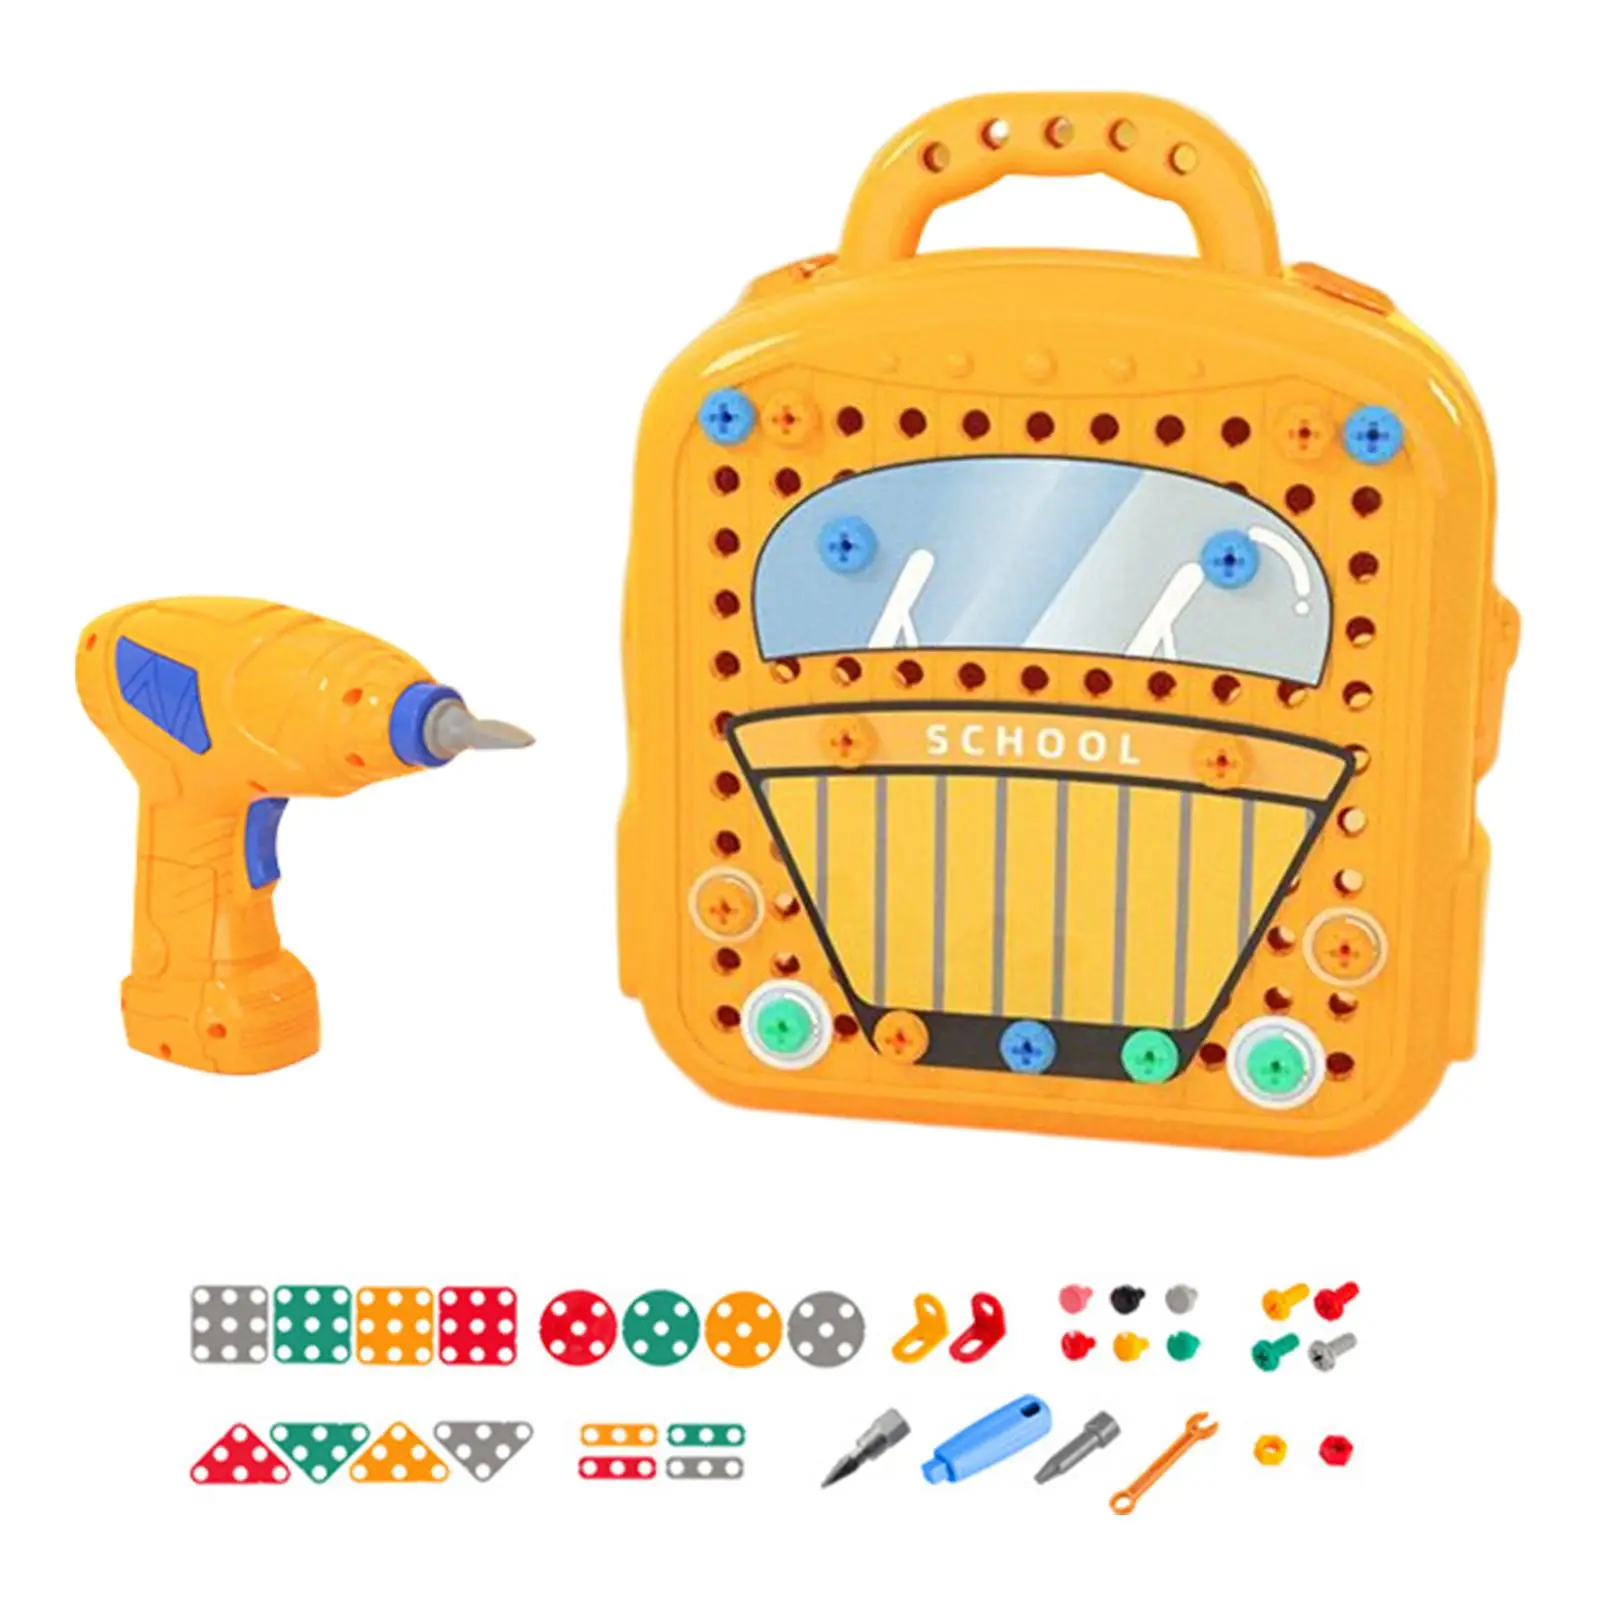 Drill Set Learning DIY Drill Center with Drill for Kids Holiday Gifts